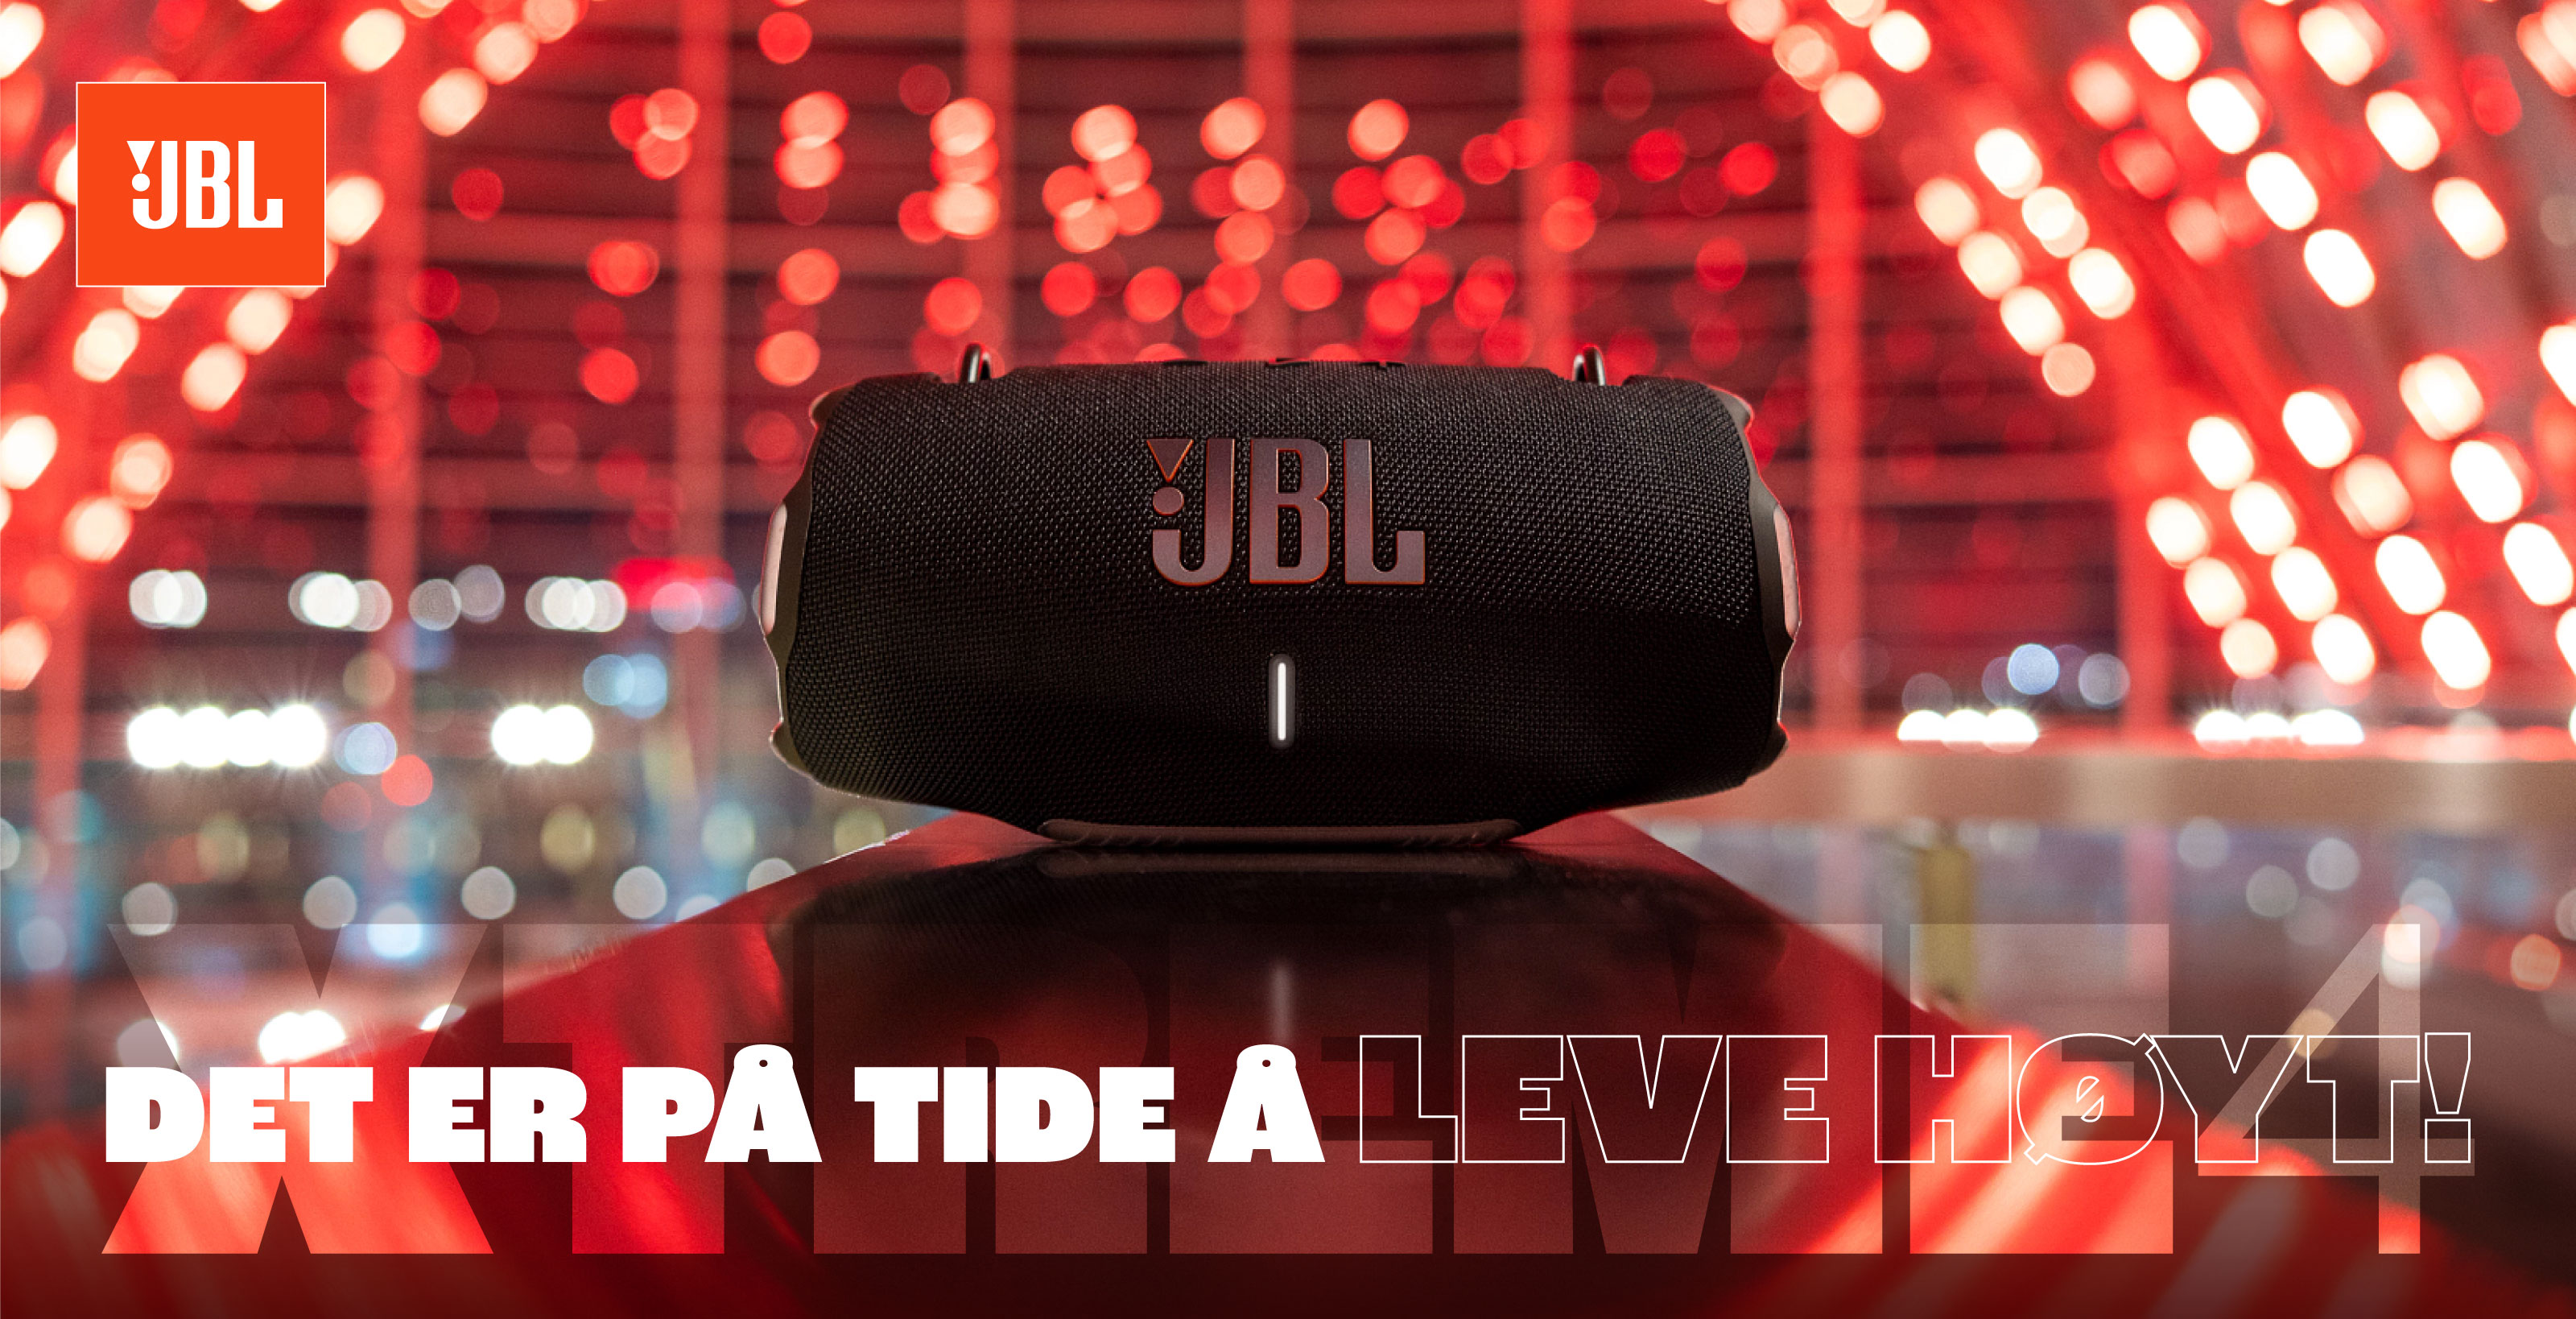 JBL Xtreme 4 - It's time to live loud